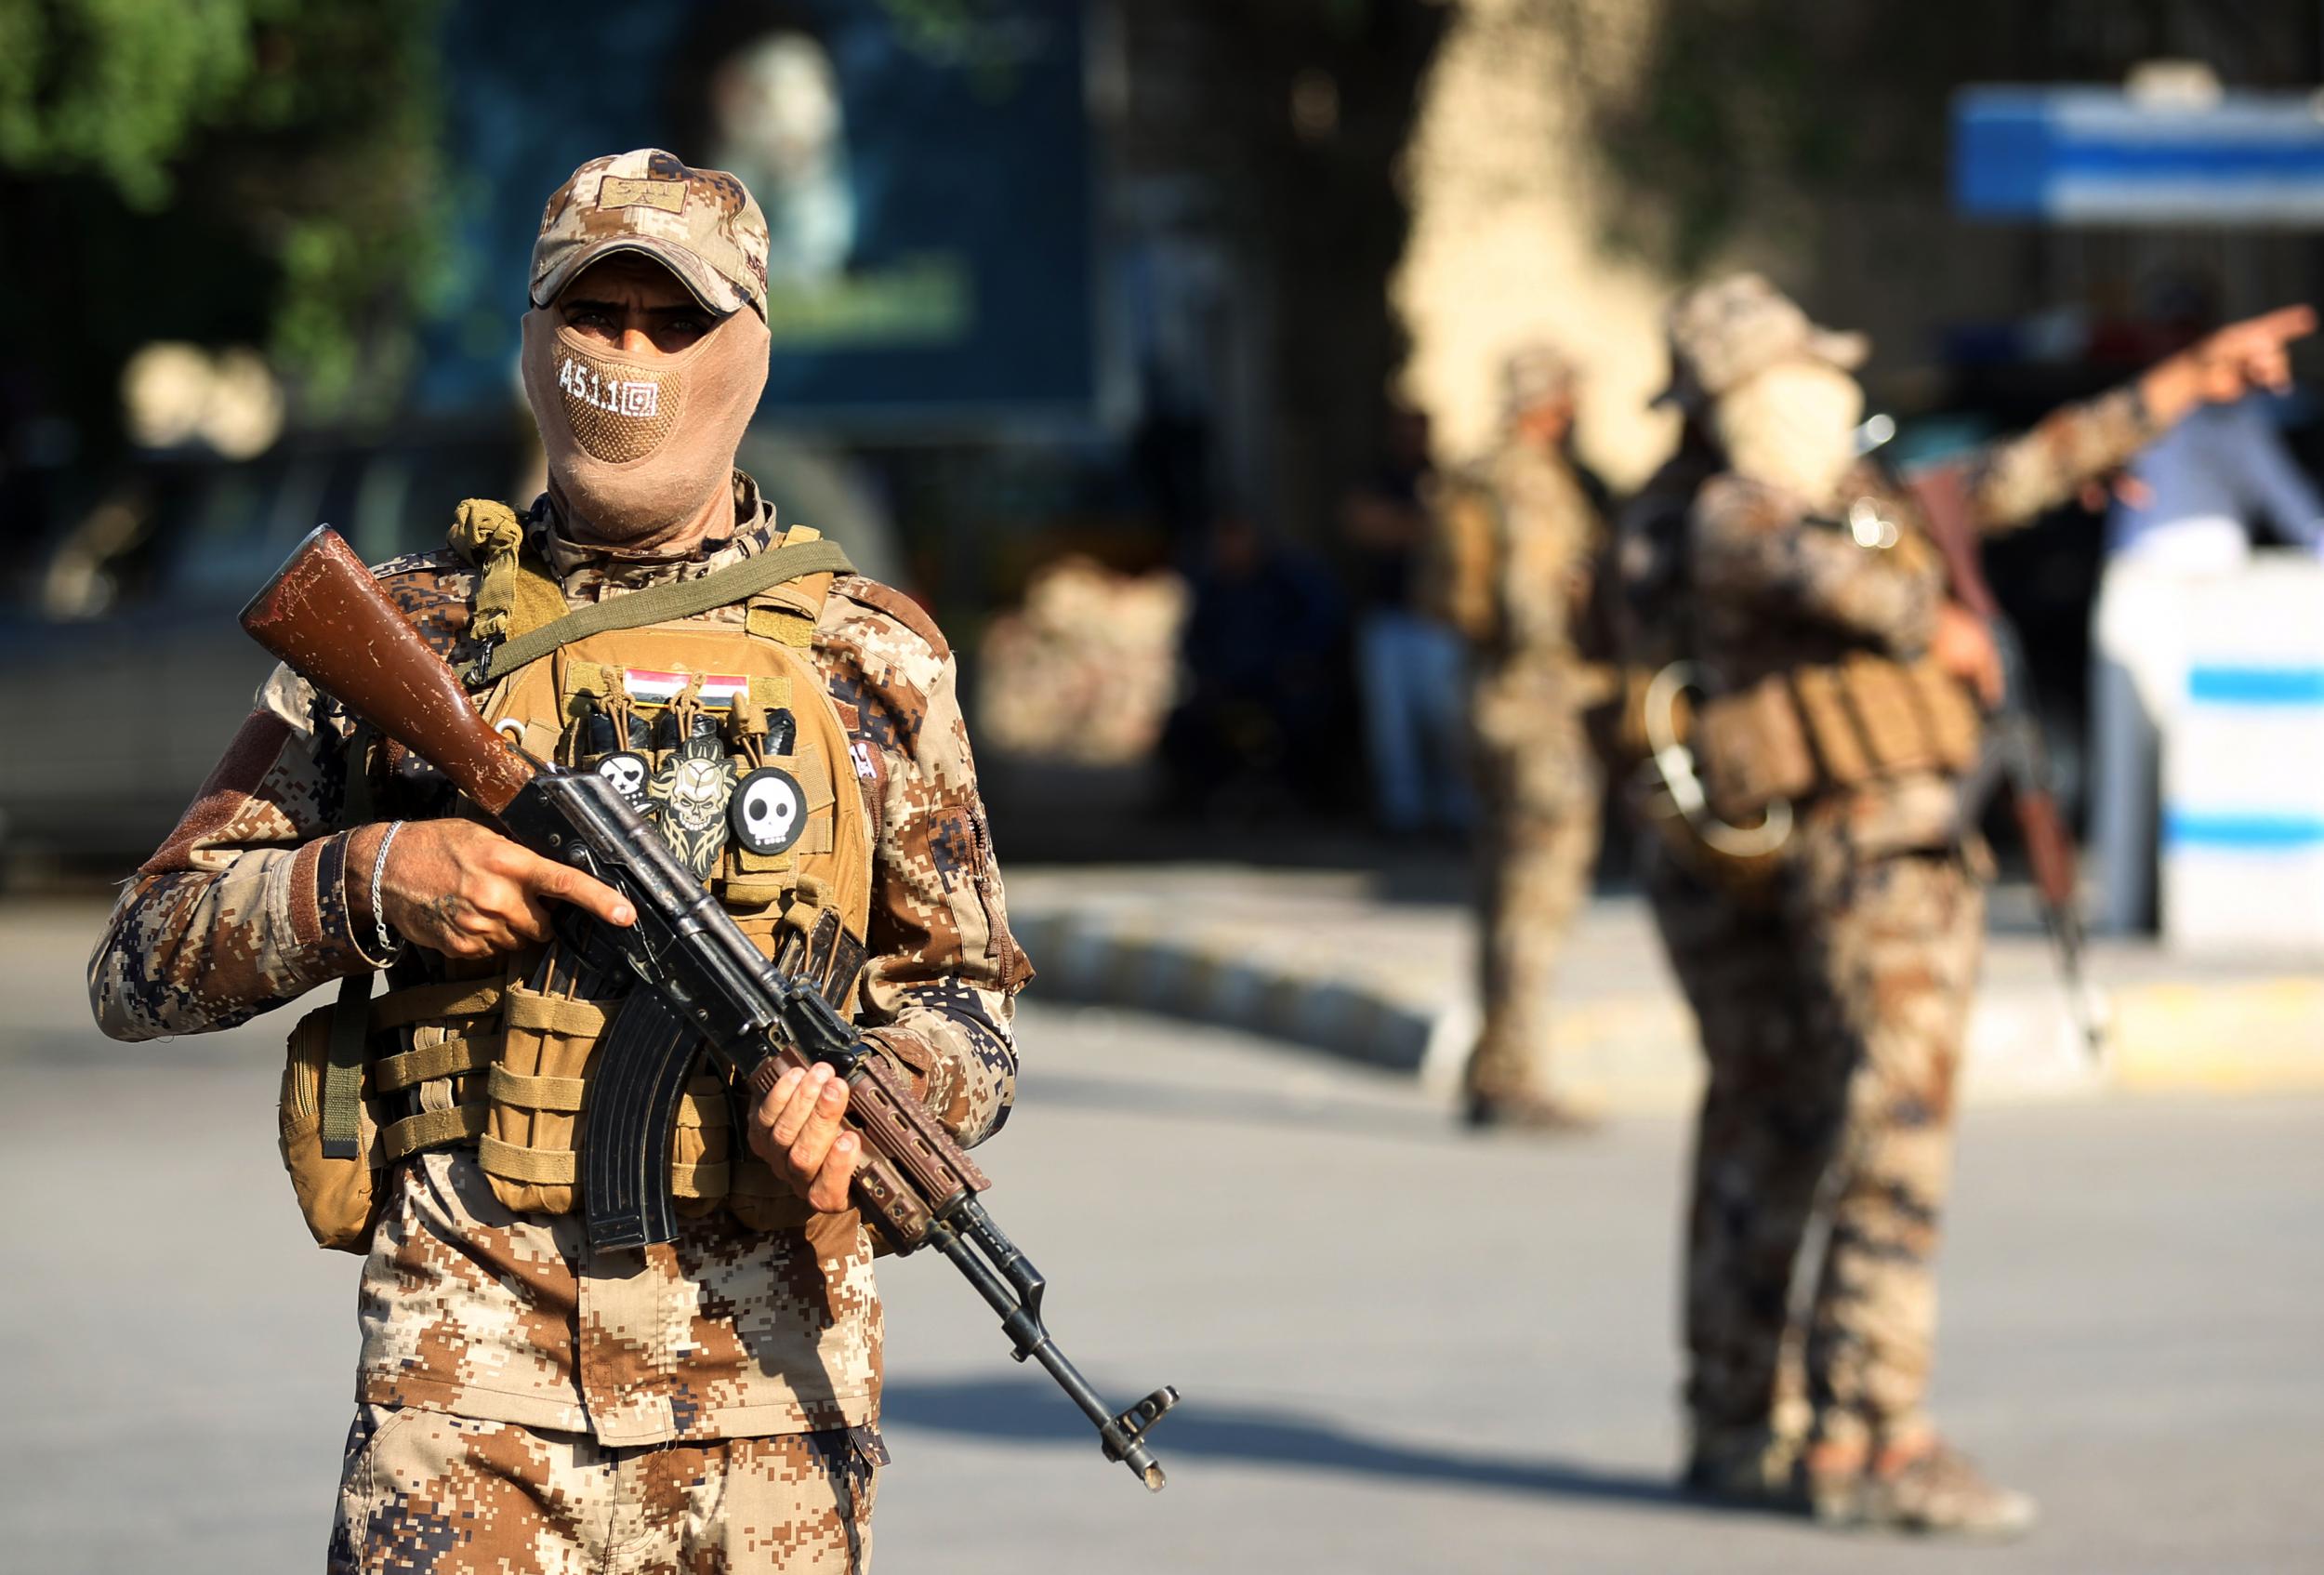 Members of the Hashed al-Shaabi, or Popular Mobilisation Forces (PMF), paramilitaries stand guard during a funerary procession for Wissam Alyawi, a leading commander of the Asaib Ahl Al-Haq faction that is part of the PMF, in the Iraqi capital Baghdad on October 26, 2019